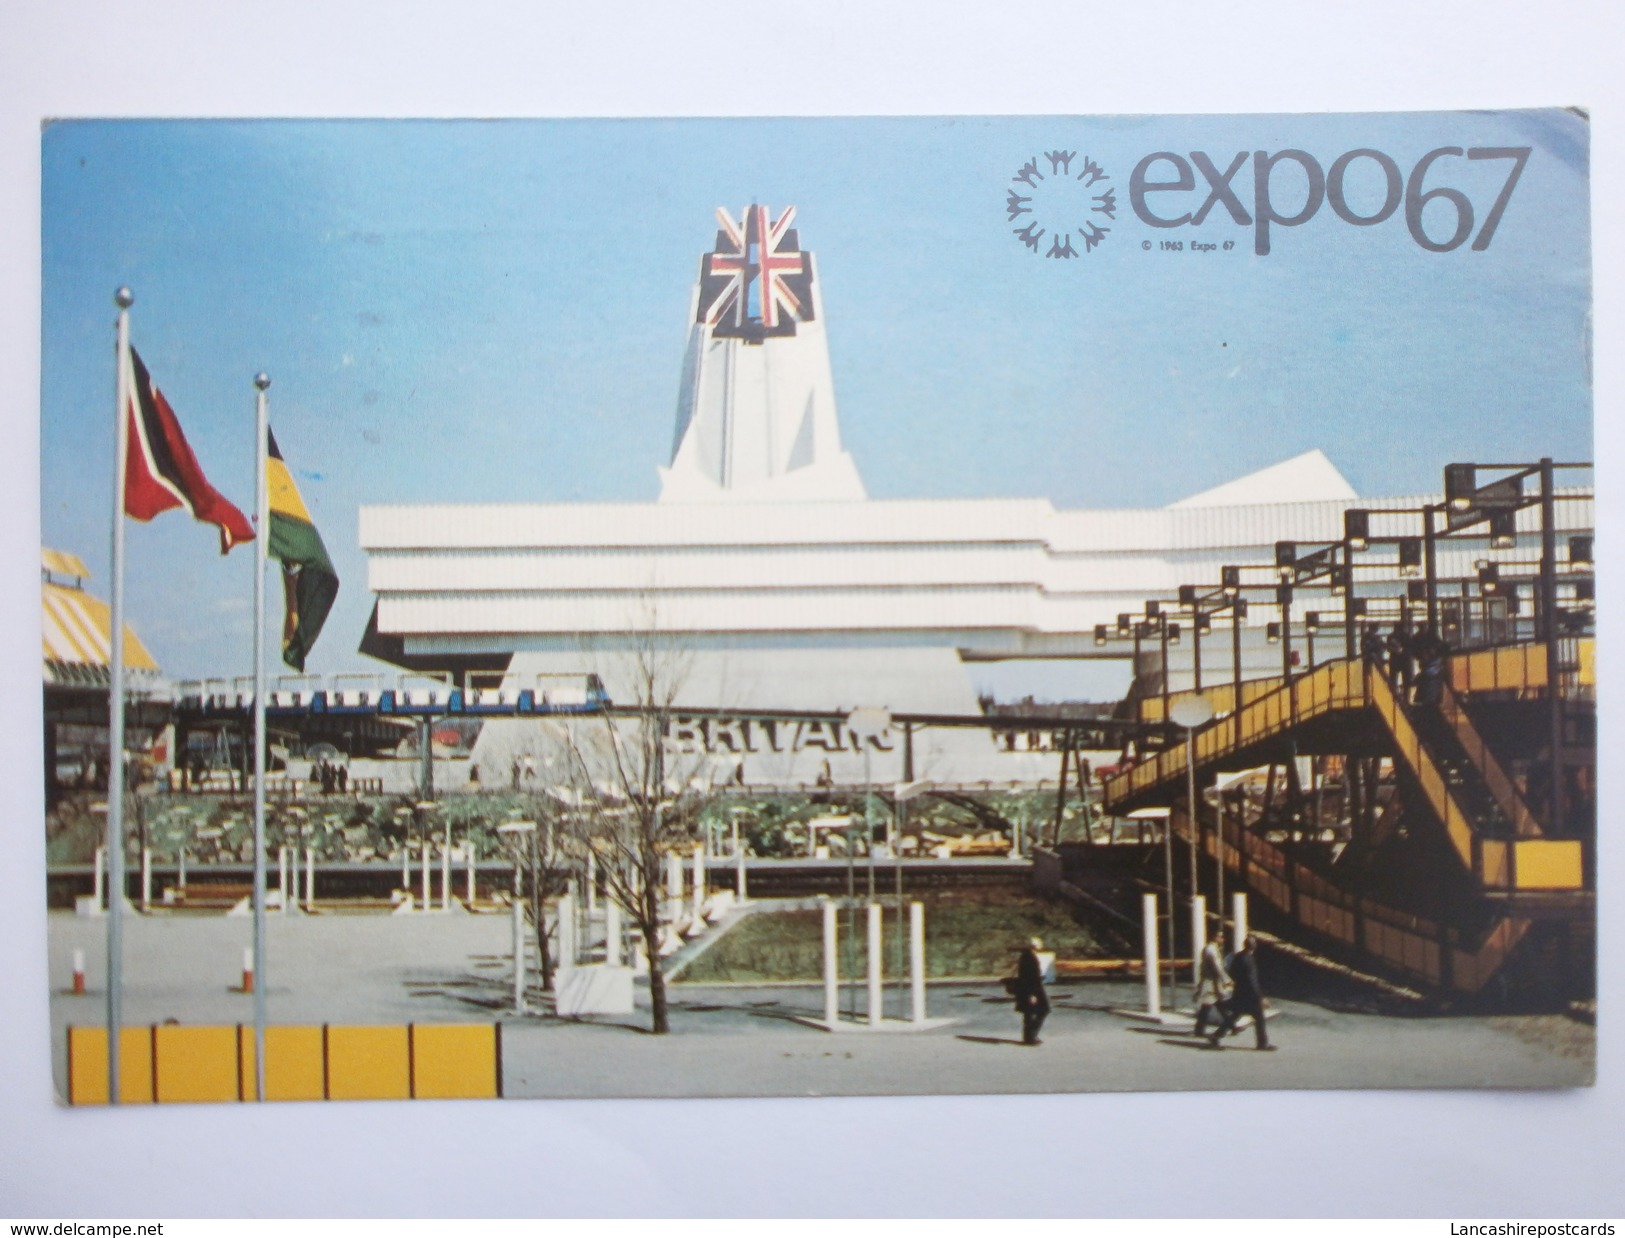 Postcard Expo 67 Montreal Canada Great Britain Pavilion To Wigan Lancashire My Ref B1302 - Exhibitions